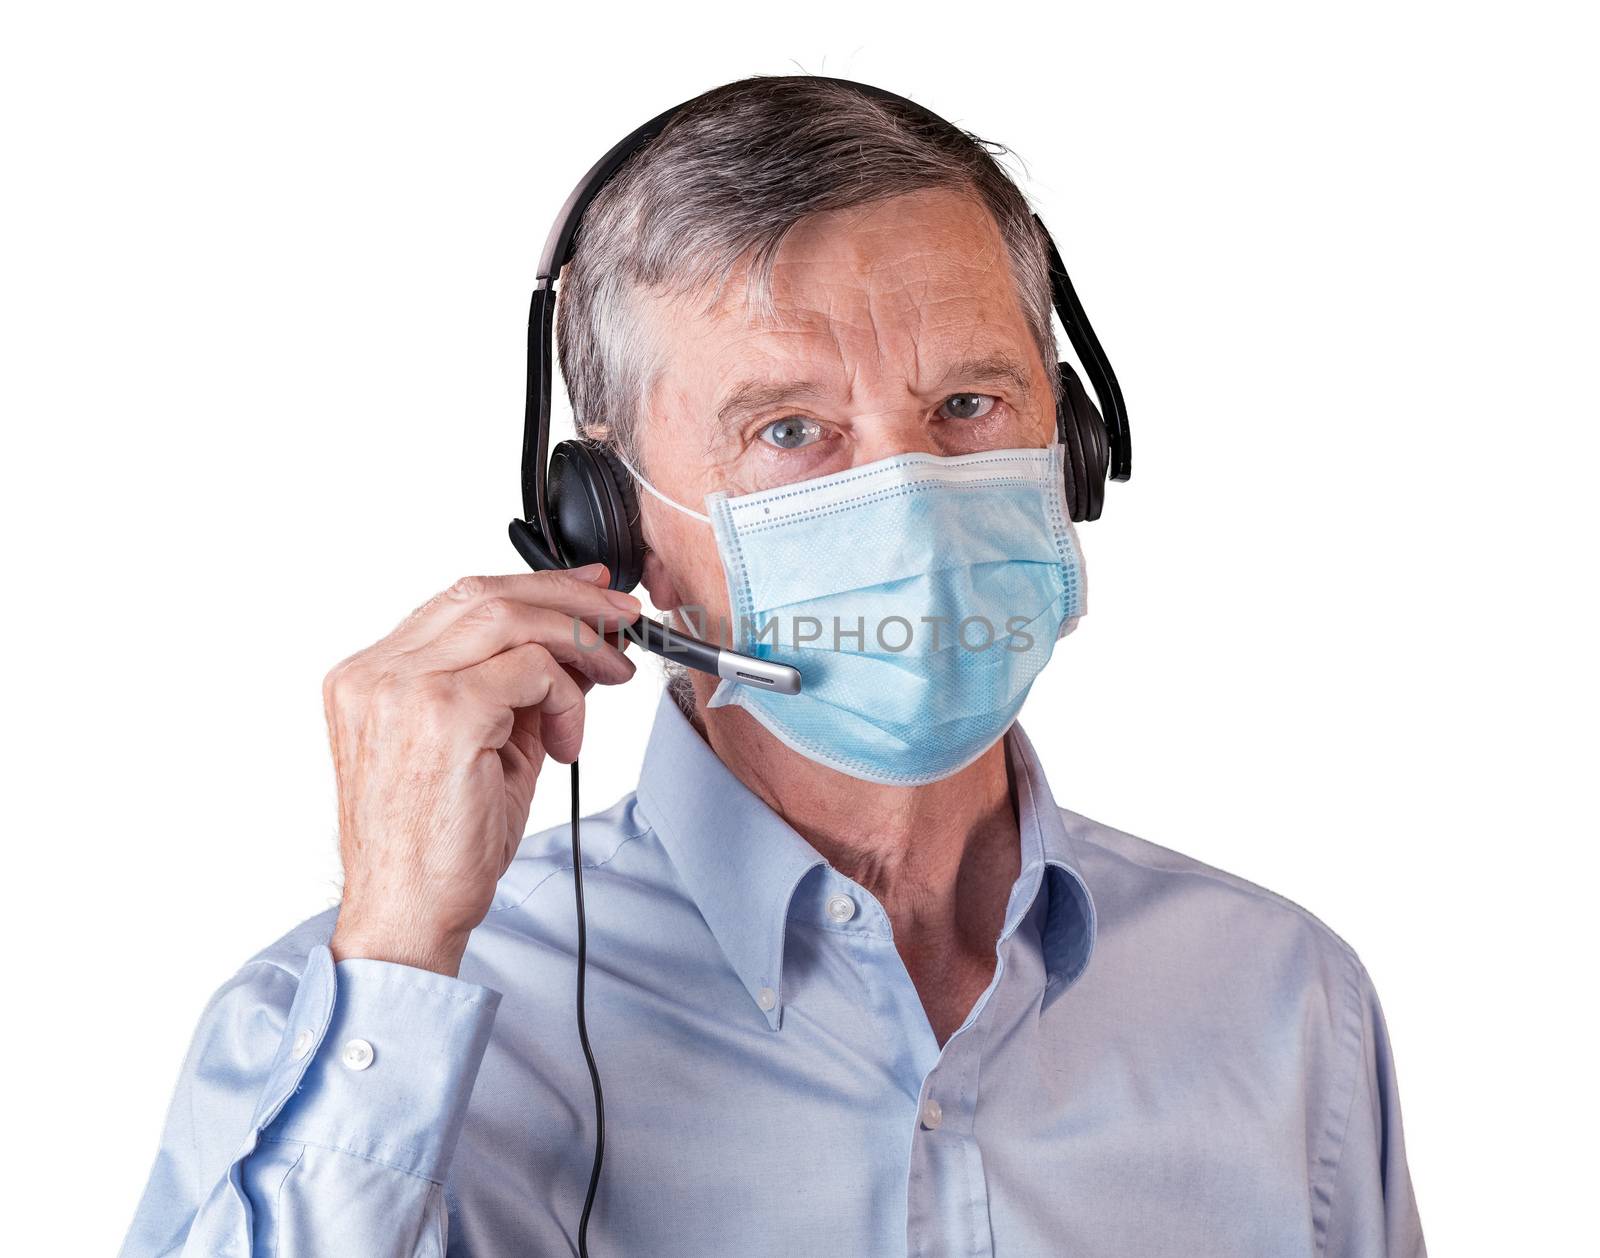 Senior caucasian man wearing facemask using headset to talk to customers or team during coronavirus epidemic. Isolated against white background